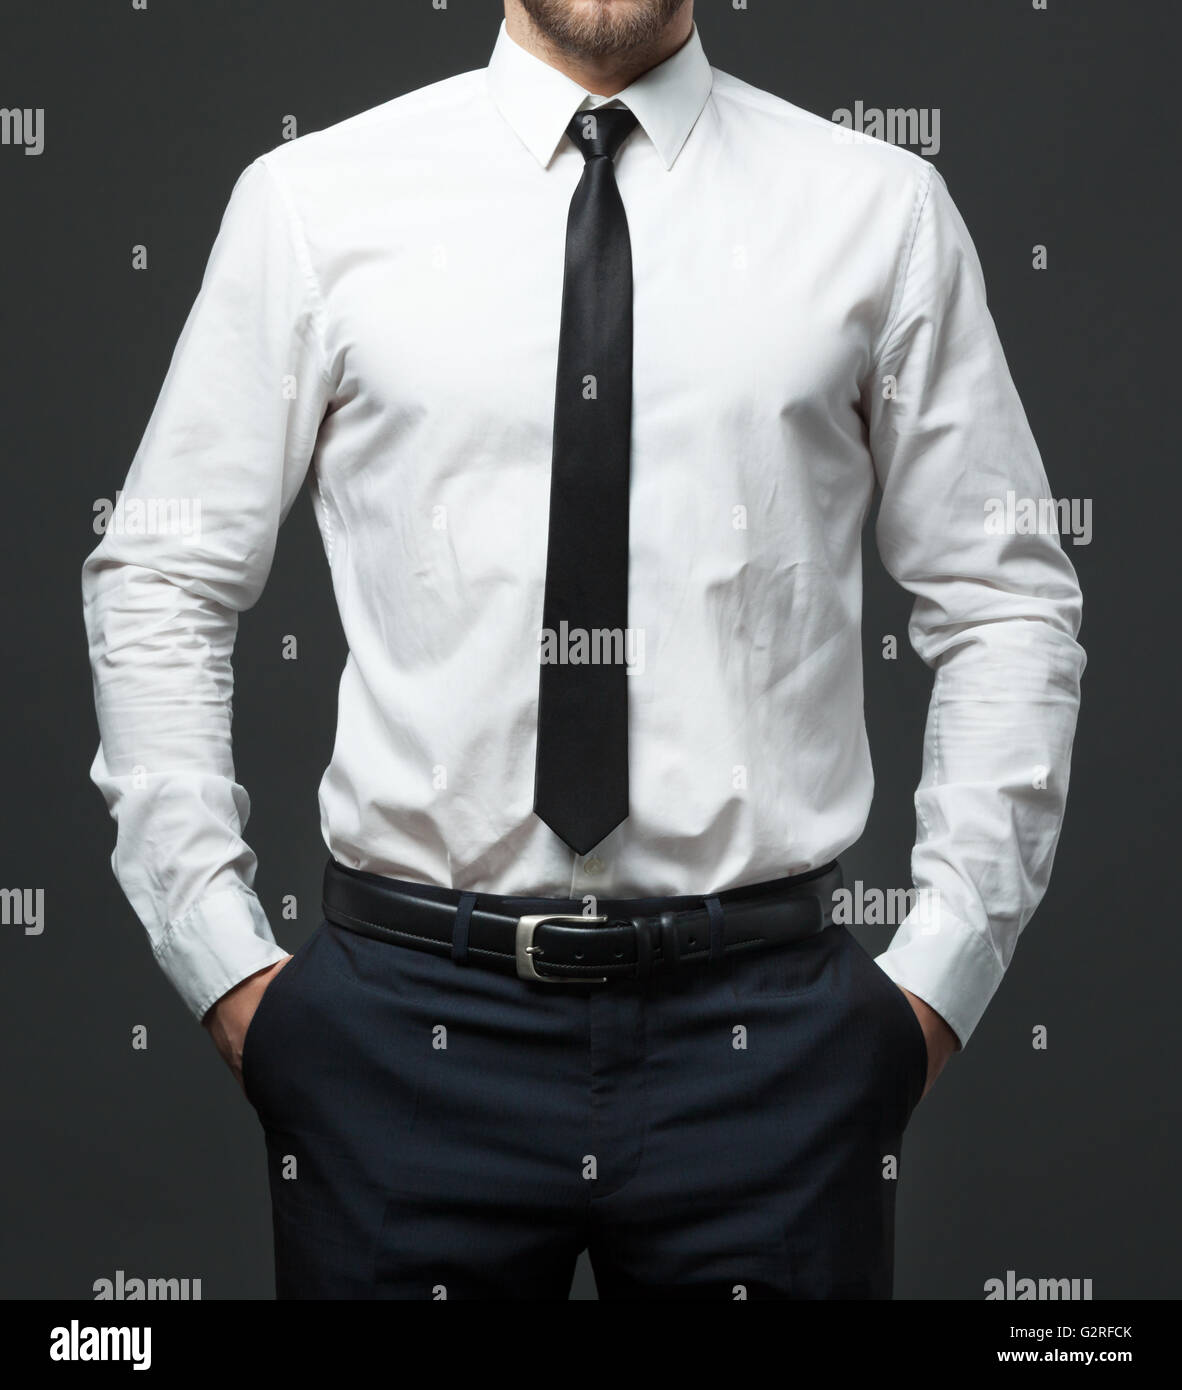 Midsection of fit young businessman standing in formal white shirt, black tie and pants. Stock Photo